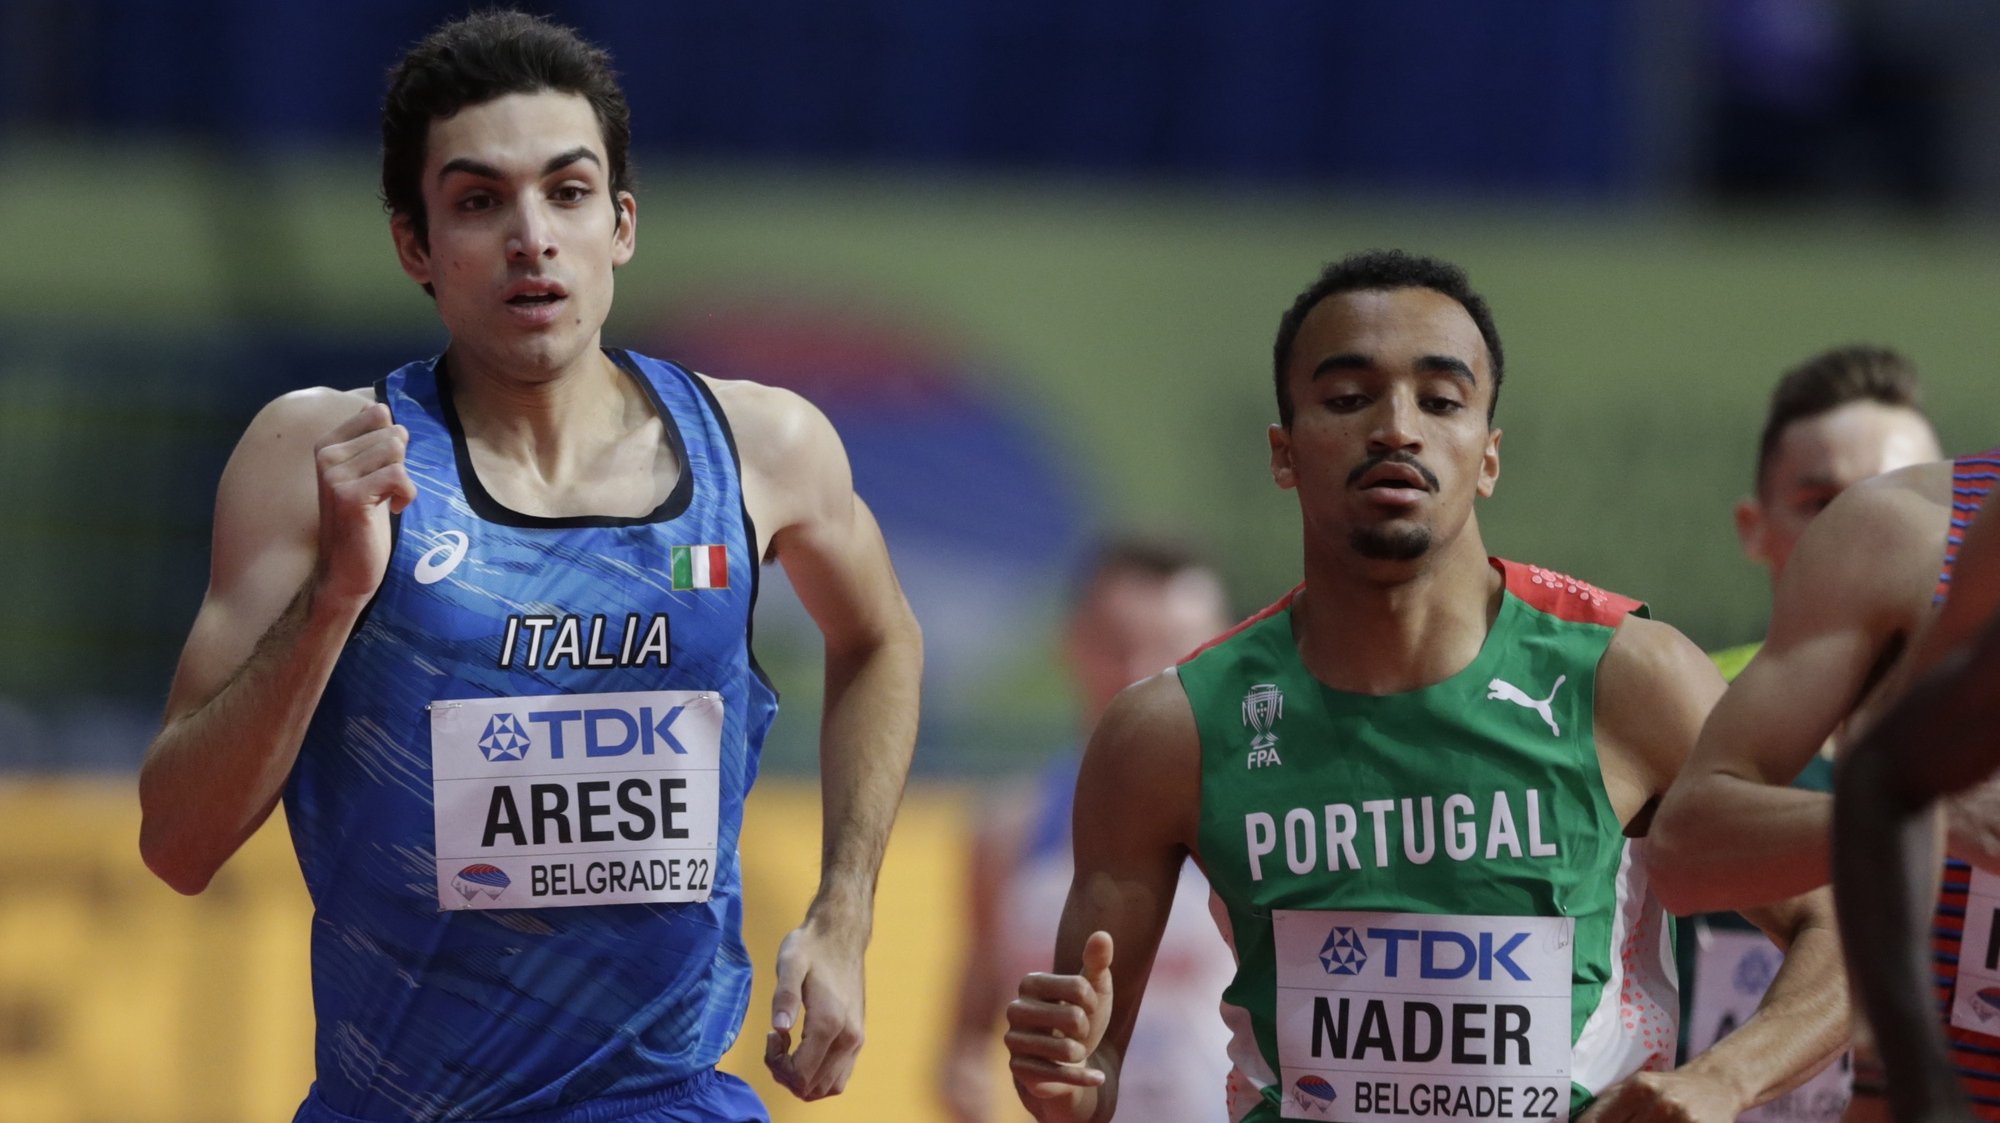 epa09835695 Pietro Arese of Italy (L) and Isaac Nader of Portugal (R) compete in the men’s 1500m heats at the World Athletics Indoor Championships in Belgrade, Serbia, 19 March 2022.  EPA/ANDREJ CUKIC